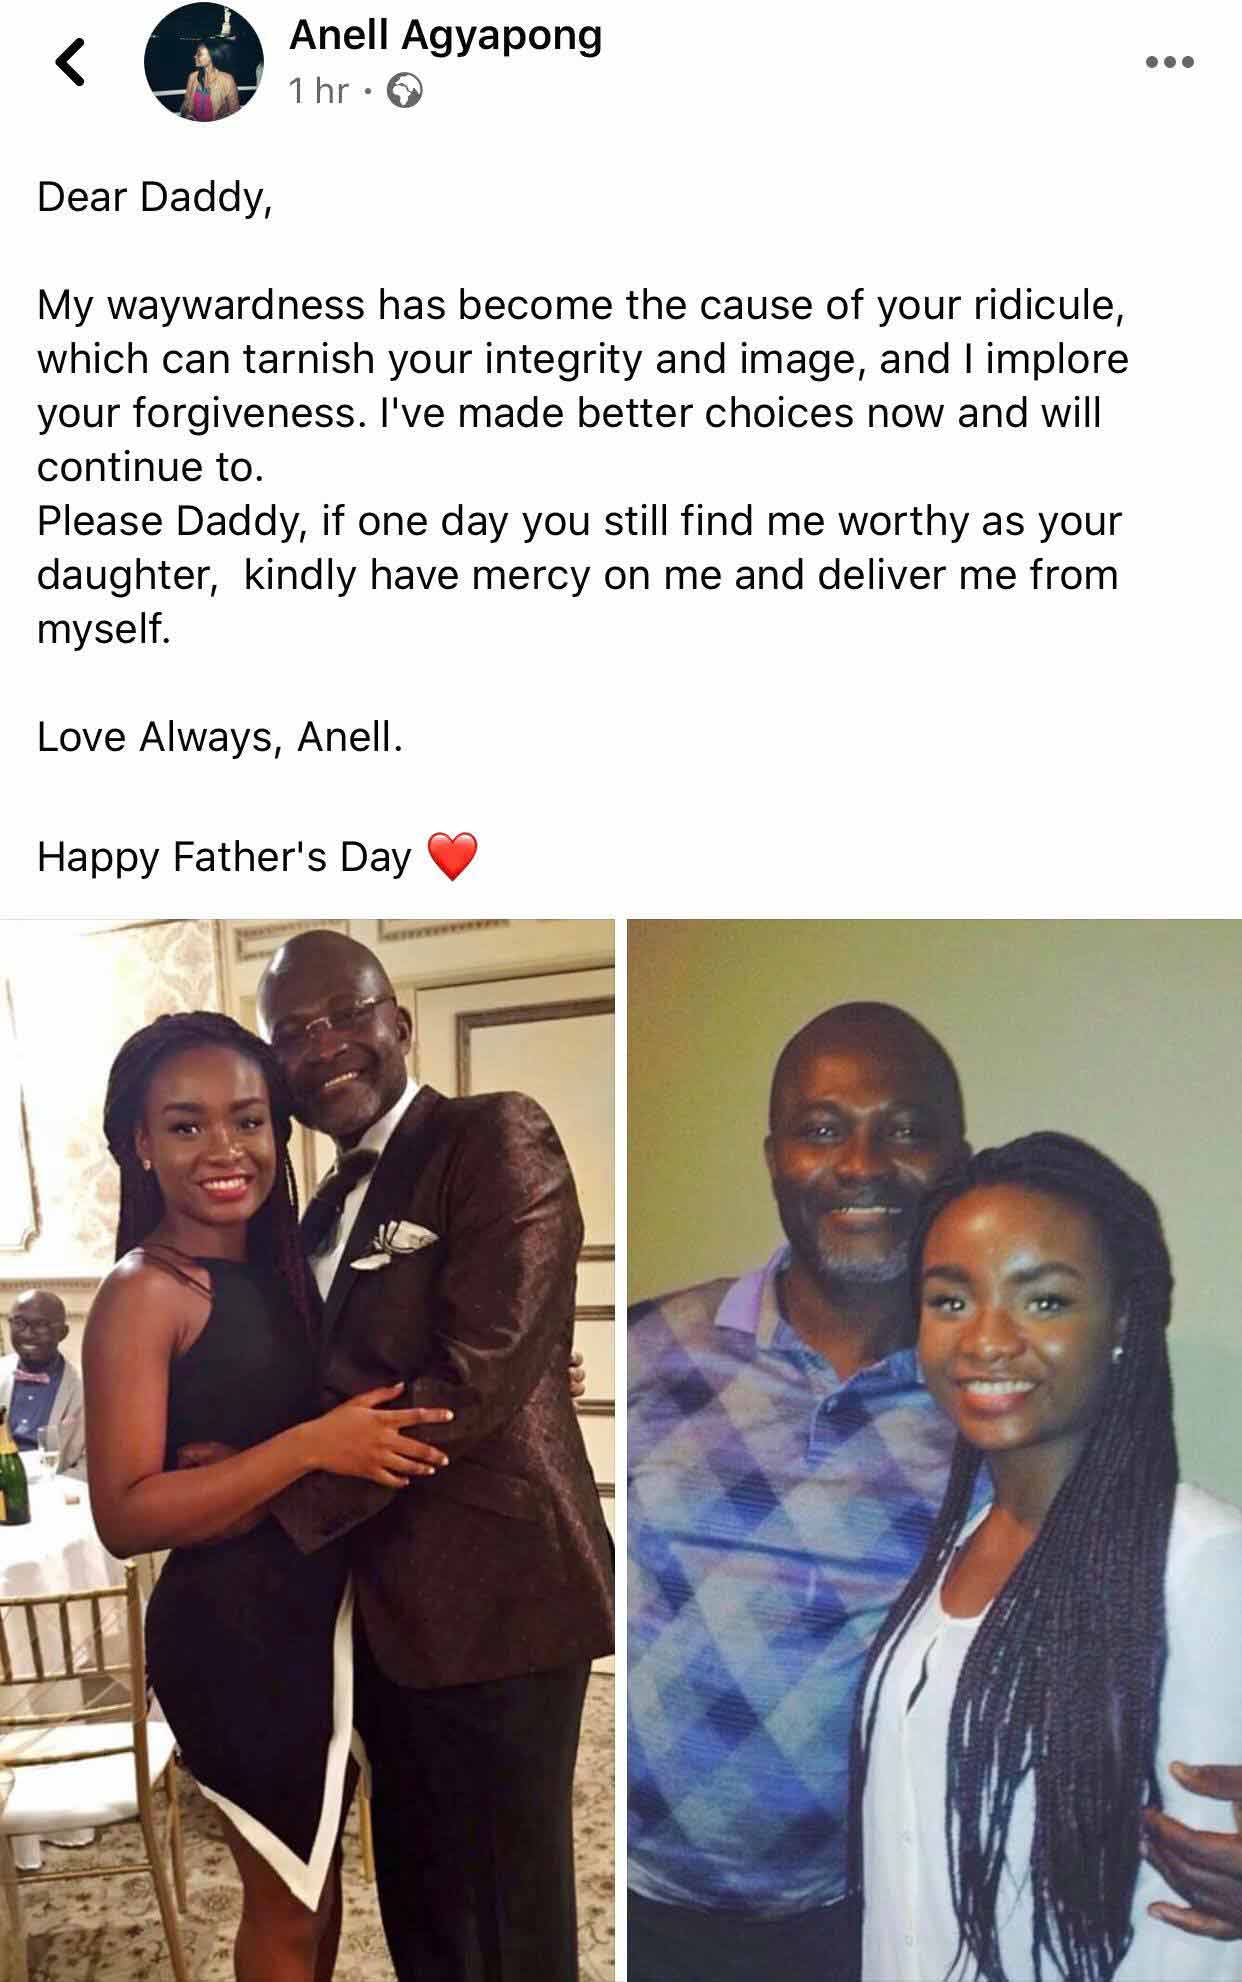 Kennedy Agyapong and daughter, Anell Agyapong